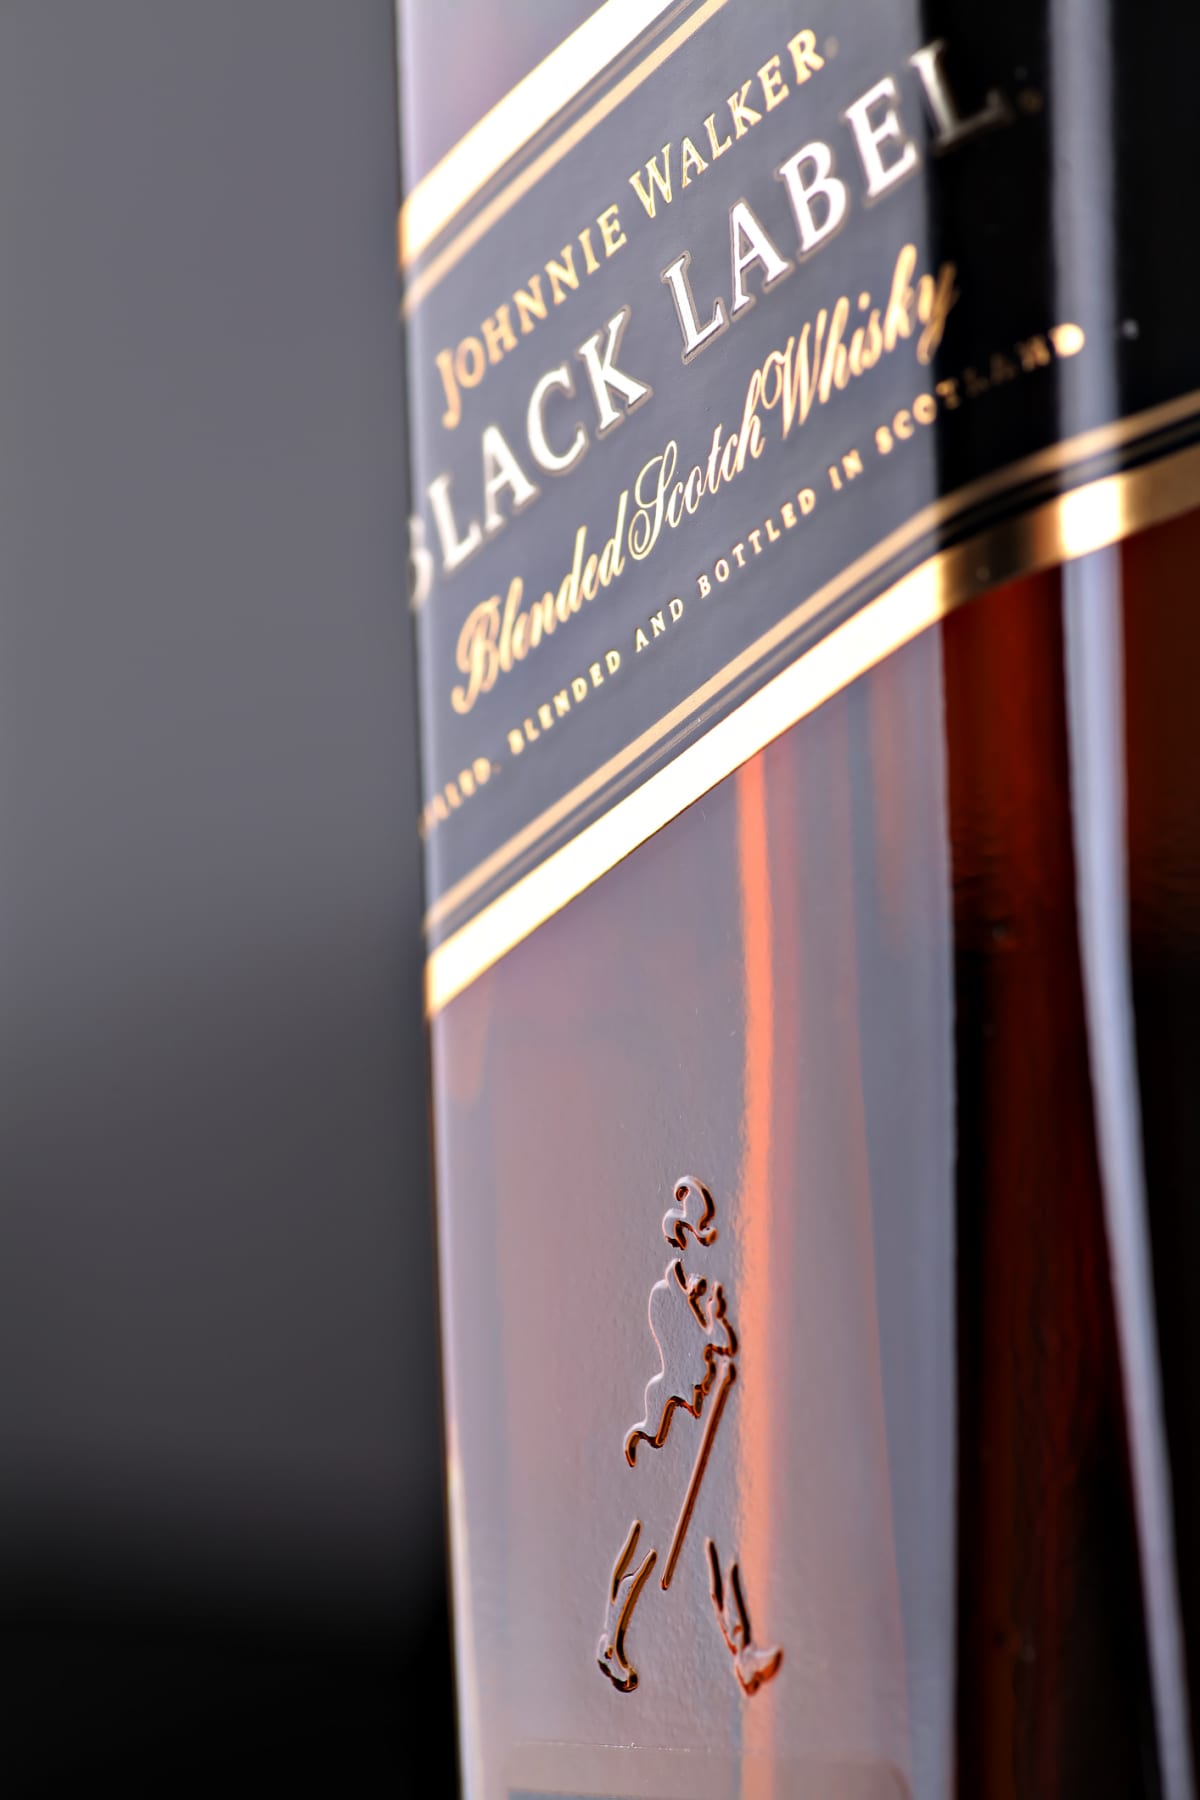 "Bucharest, Romania - July 15, 2011: Close-up shot of a bottle of Johnnie Walker whiskey. Johnnie Walker is a brand of Scotch Whisky owned by Diageo and originated in Kilmarnock, Ayrshire, Scotland."